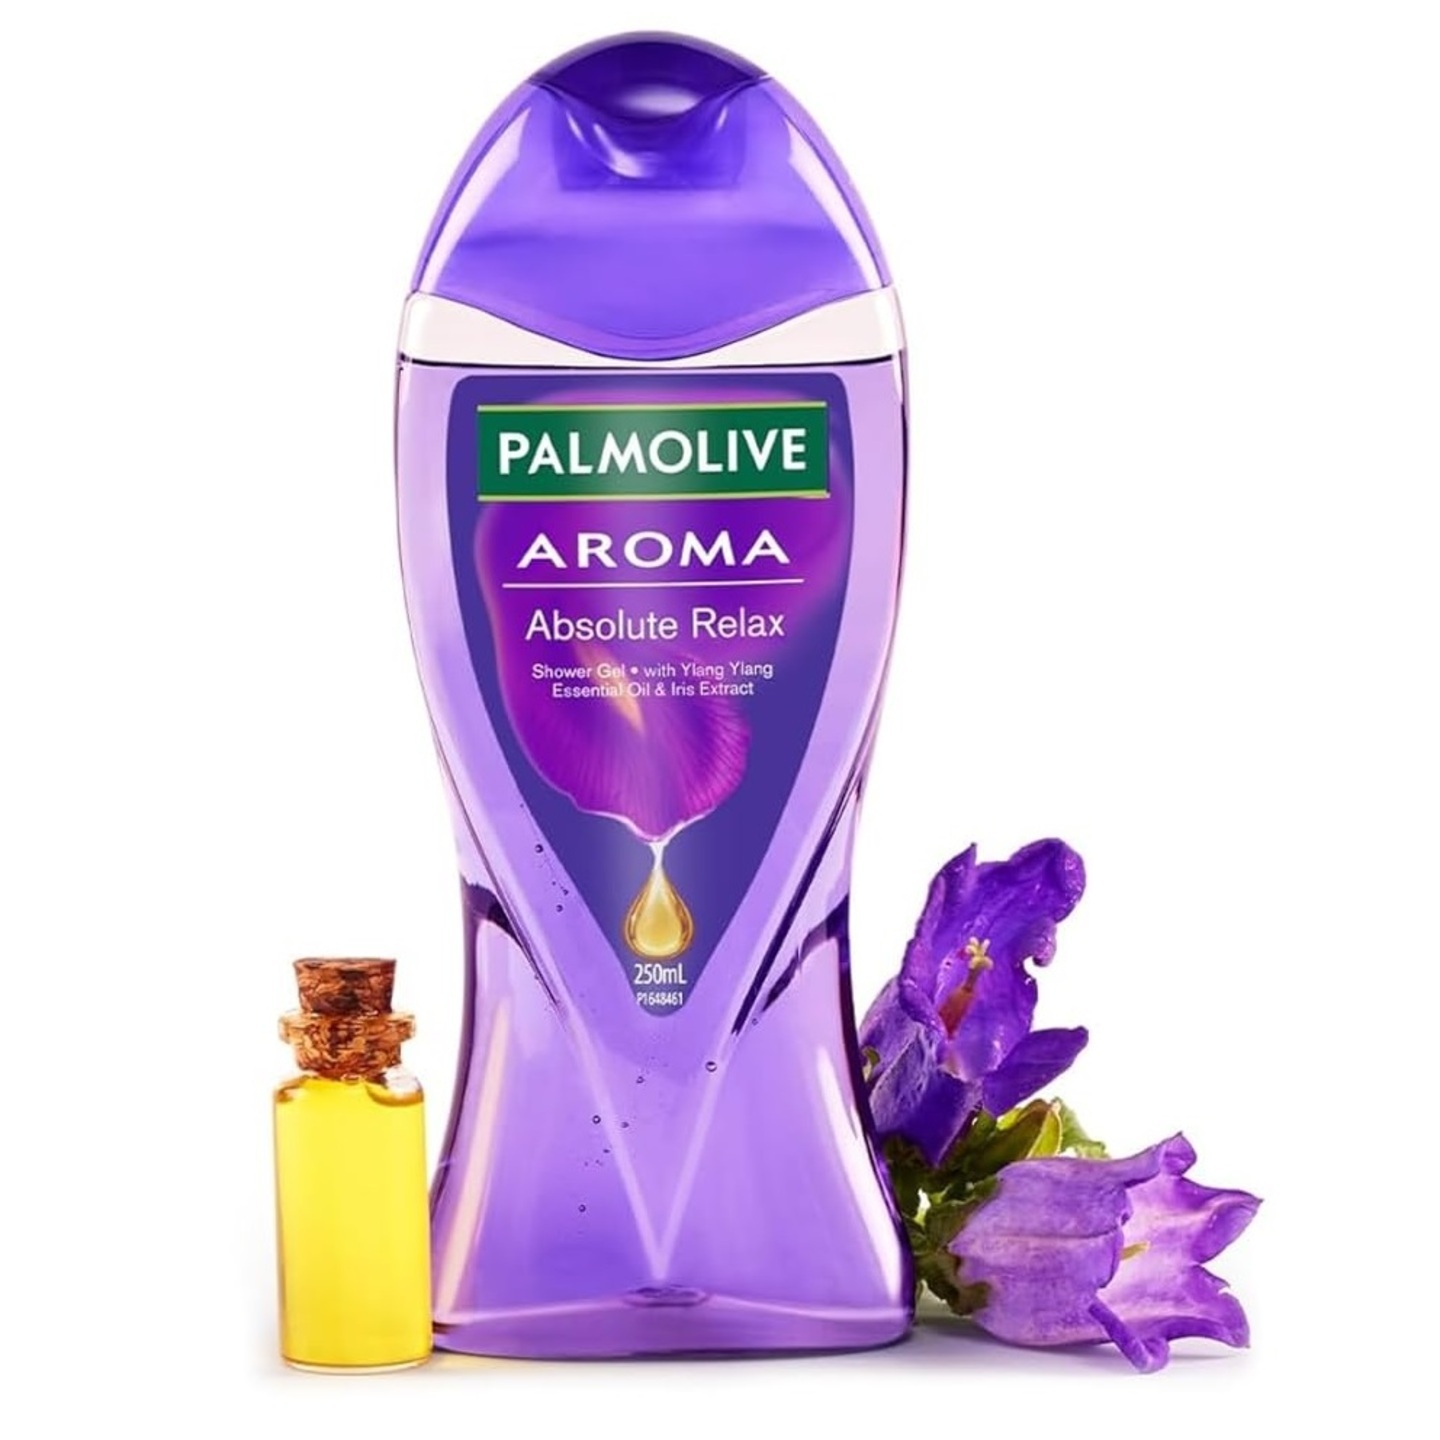 PALMOLIVE Iris & Ylang Ylang Essential Oil Aroma Absolute Relax Body Wash 250 ml